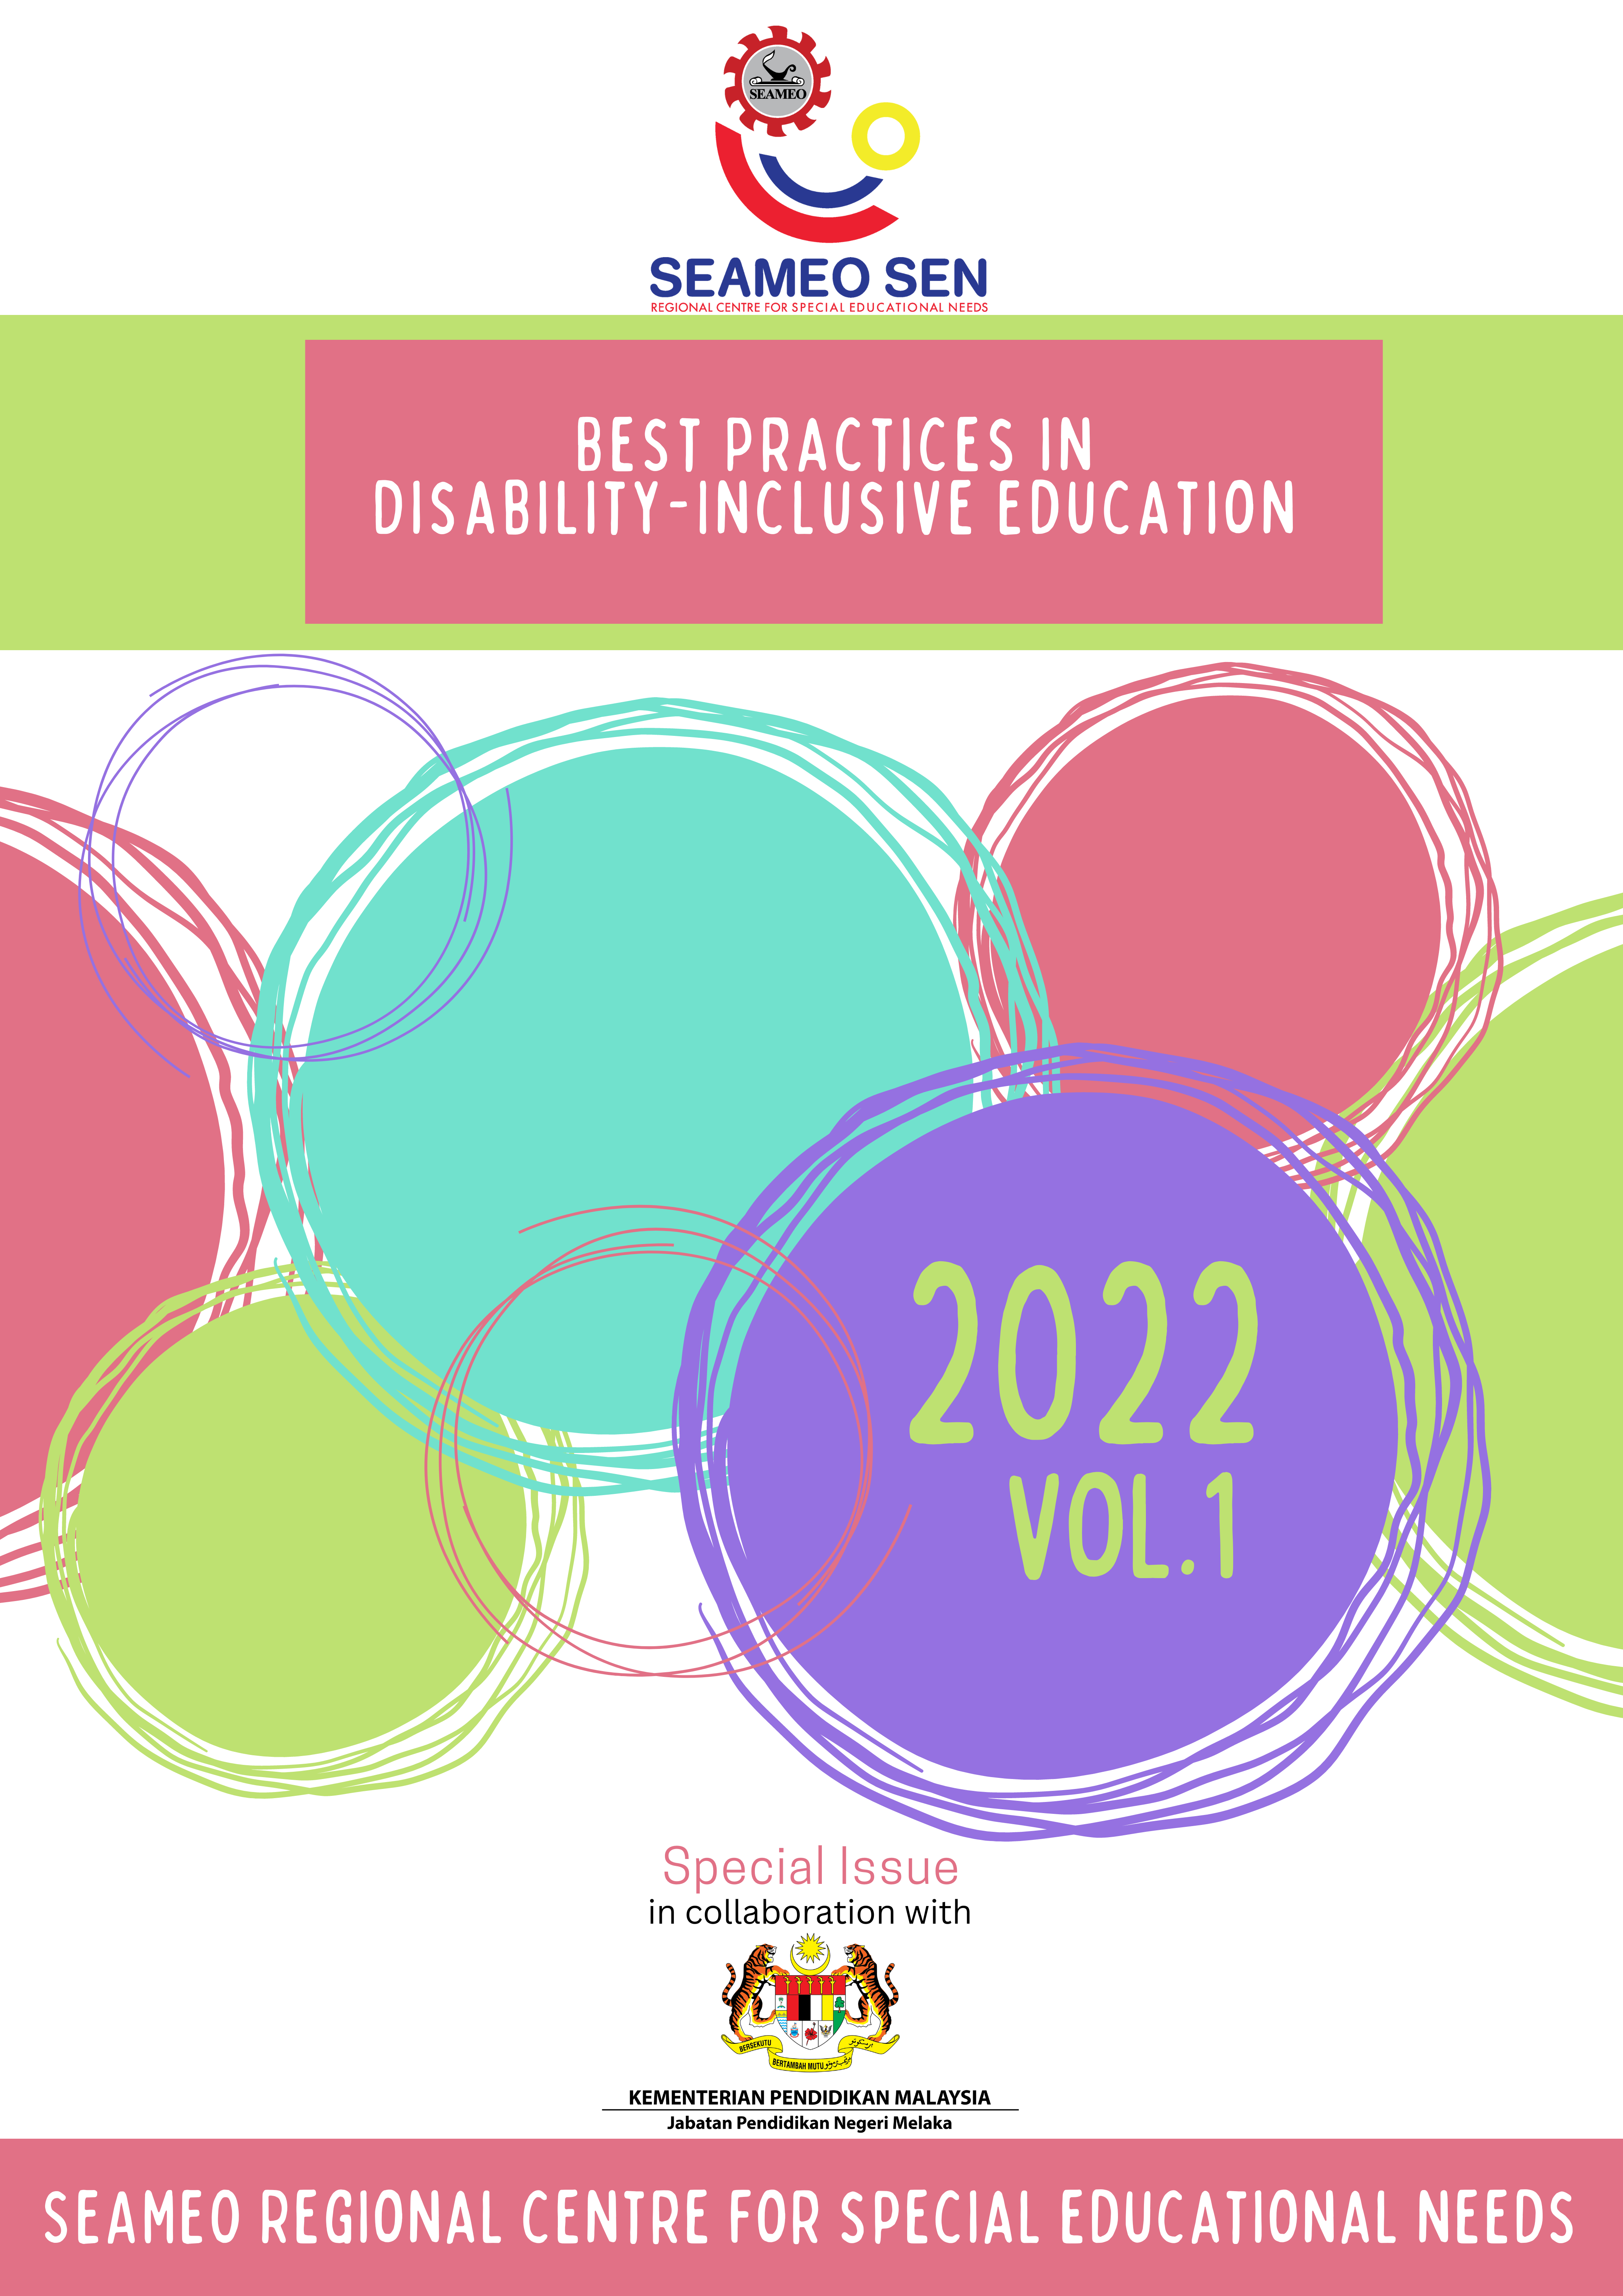 					View Vol. 1 (2022): Best Practices in Disability-Inclusive Education
				